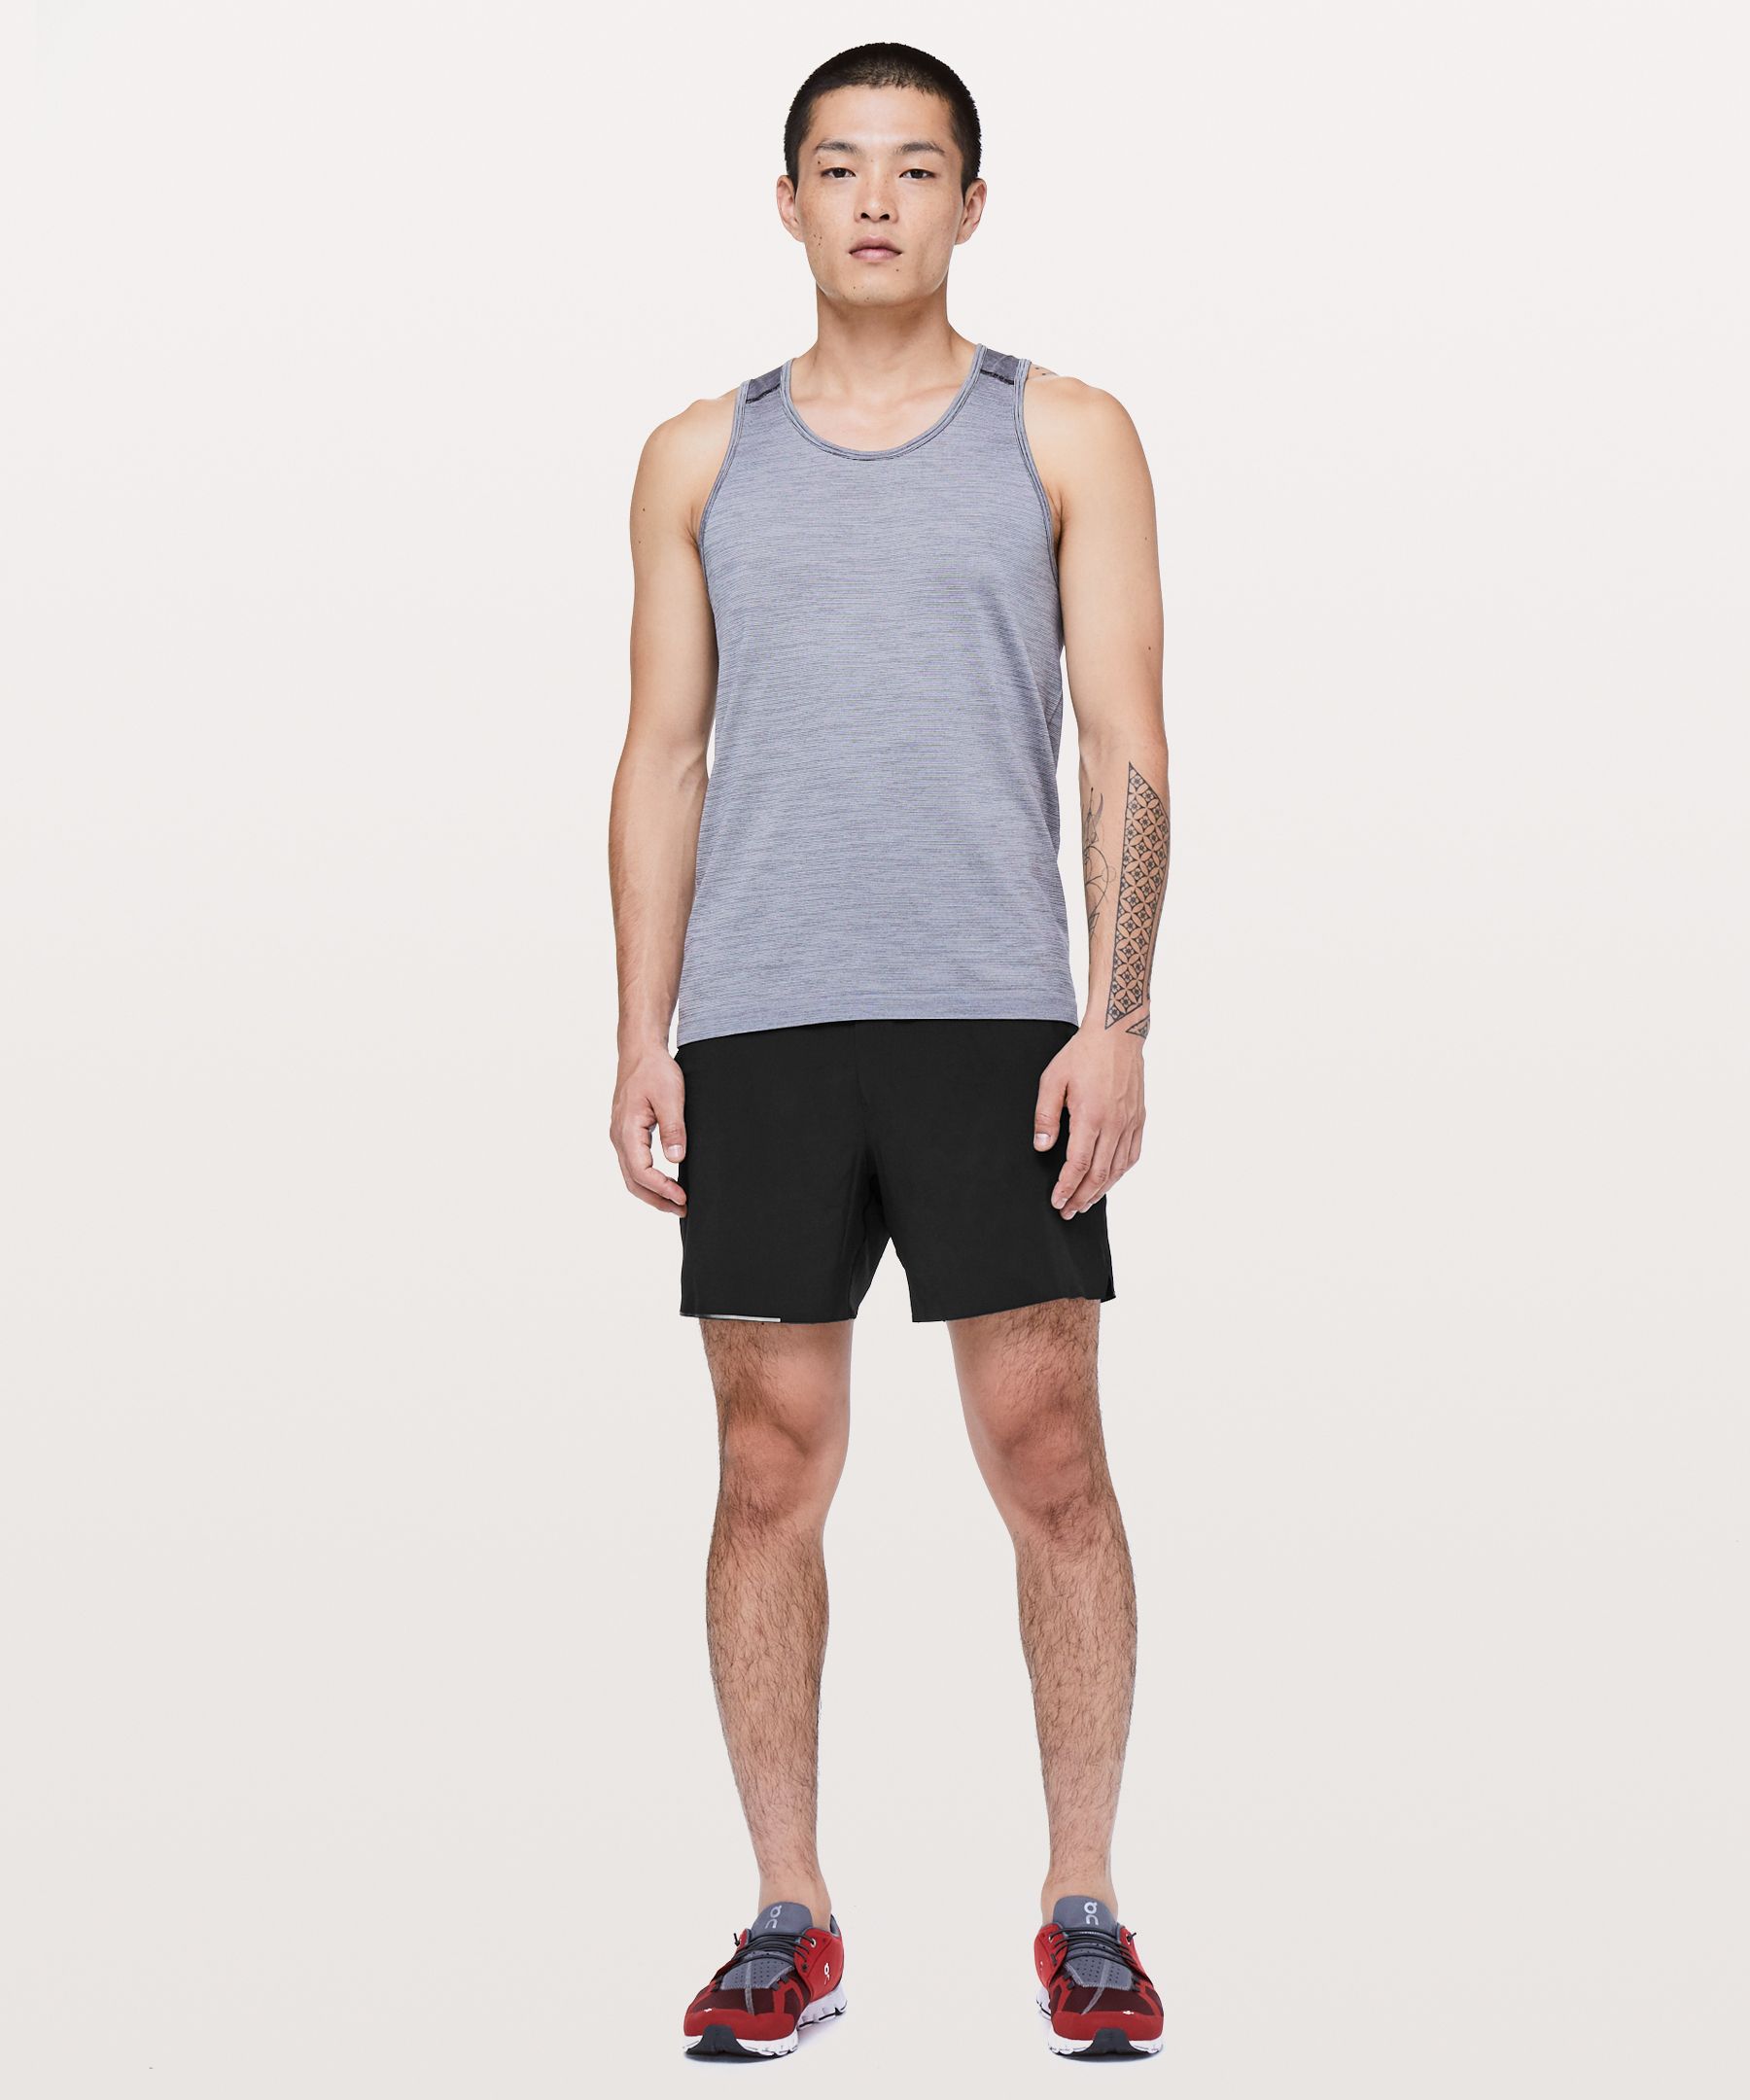 Lululemon Surge Shorts 6” linerless running shorts - clothing & accessories  - by owner - craigslist